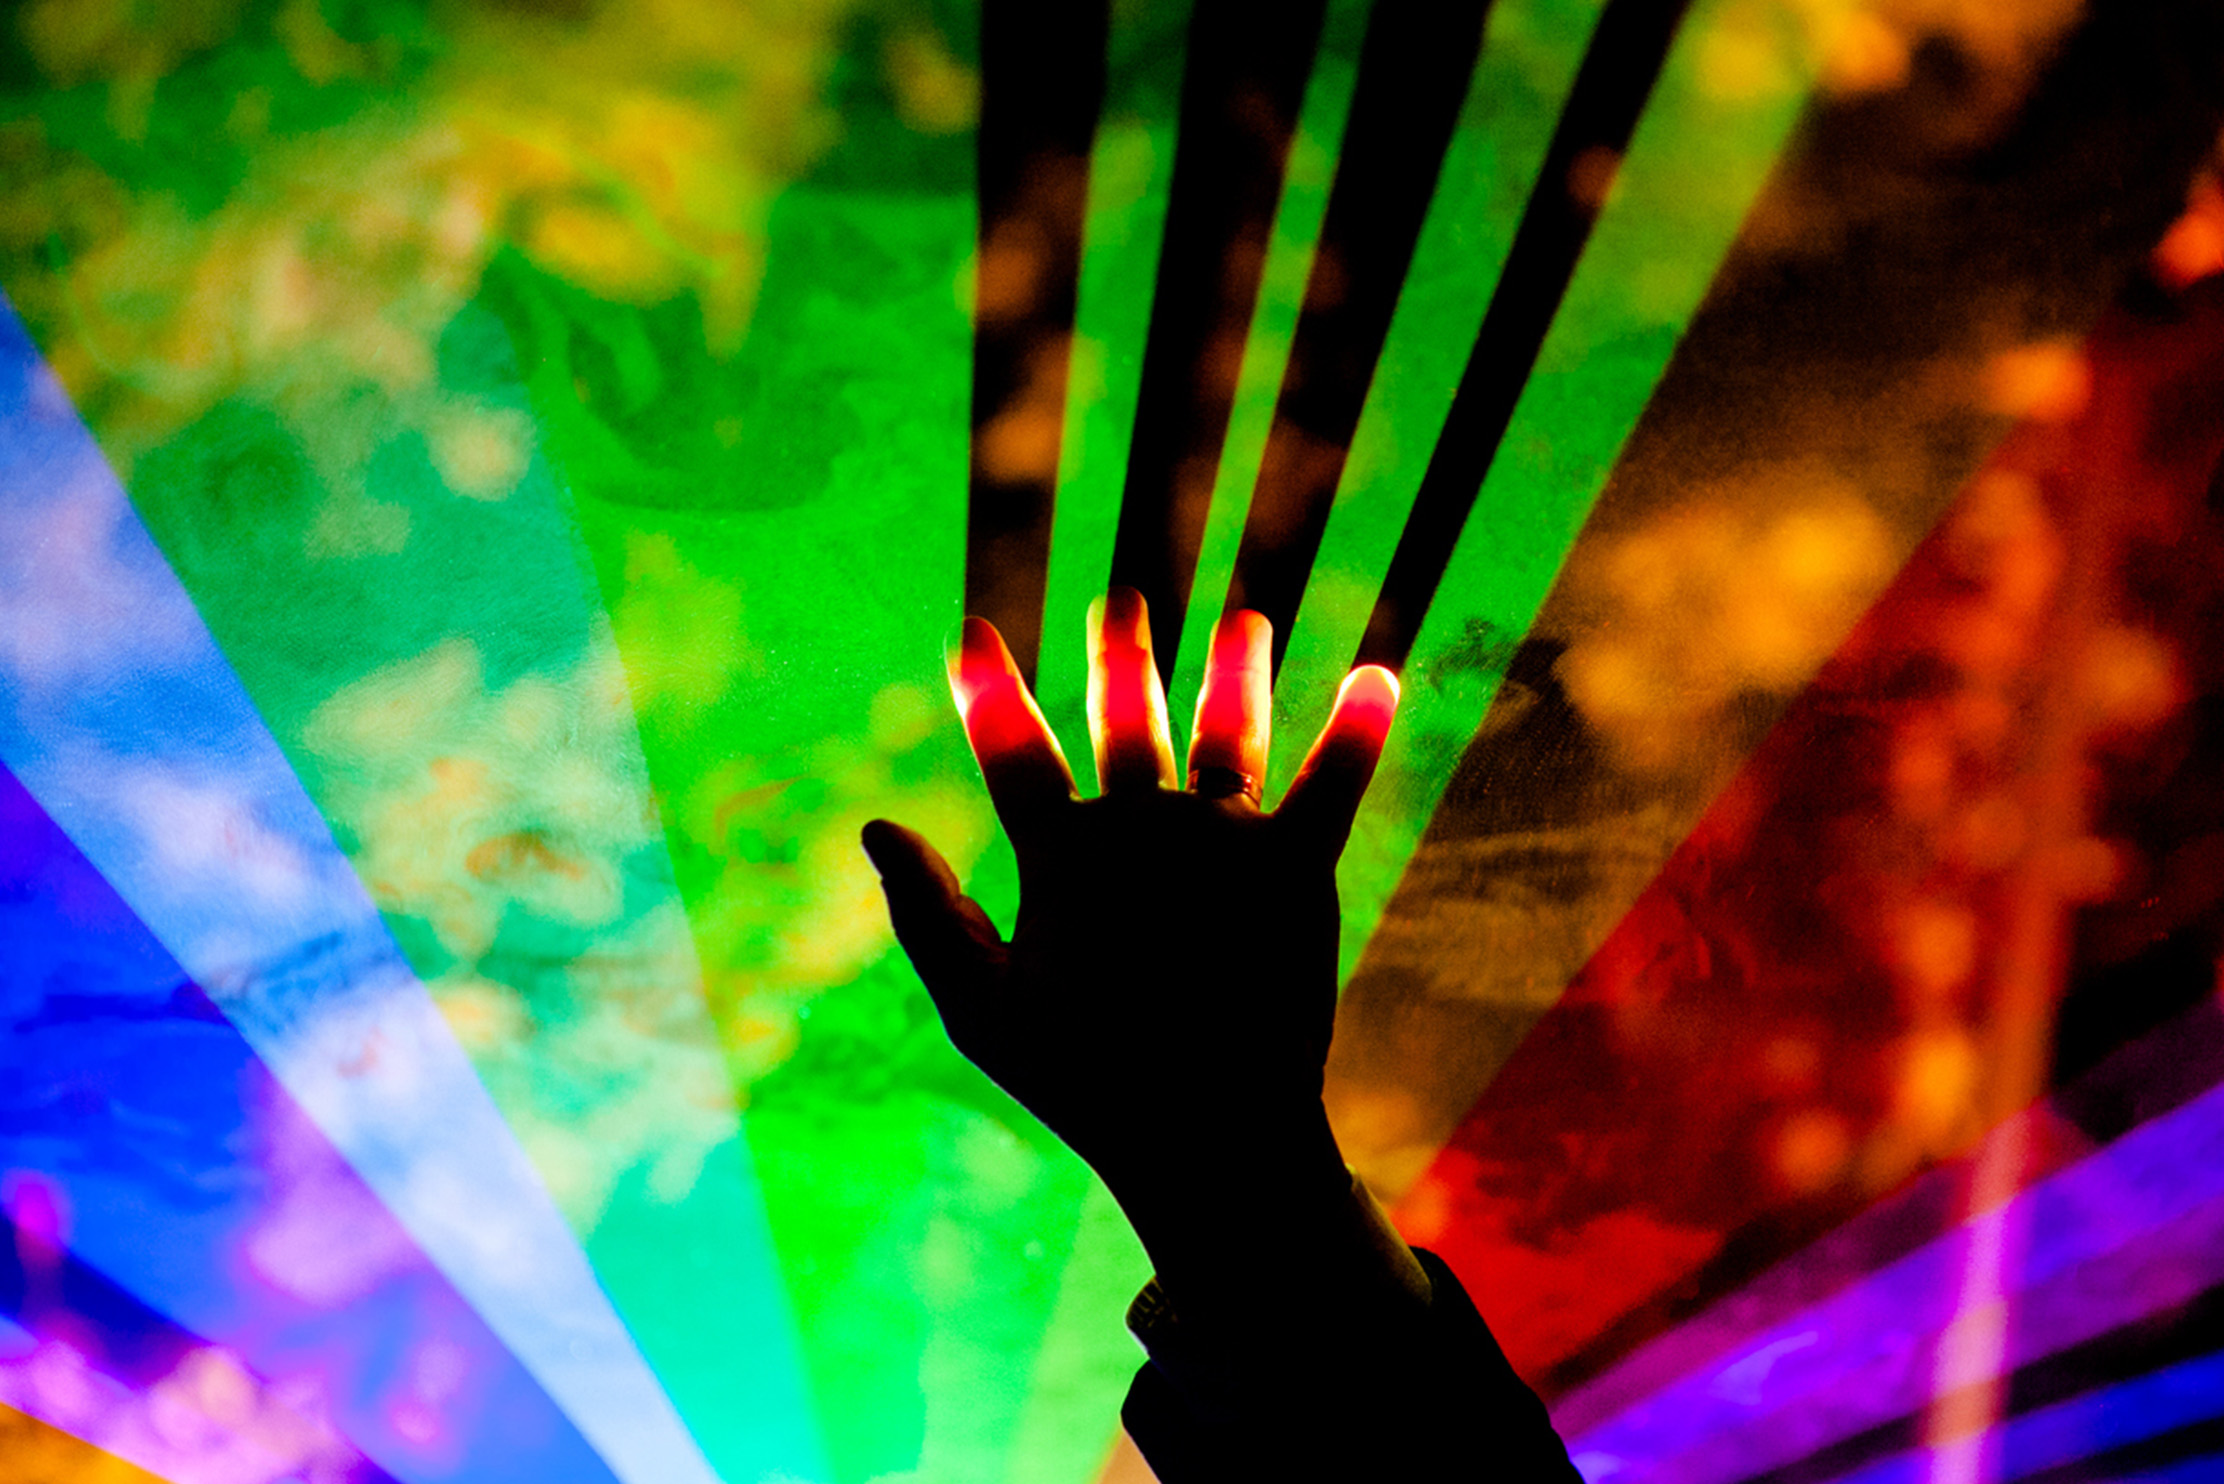 A hand raised in the air, penetrating rainbow lights